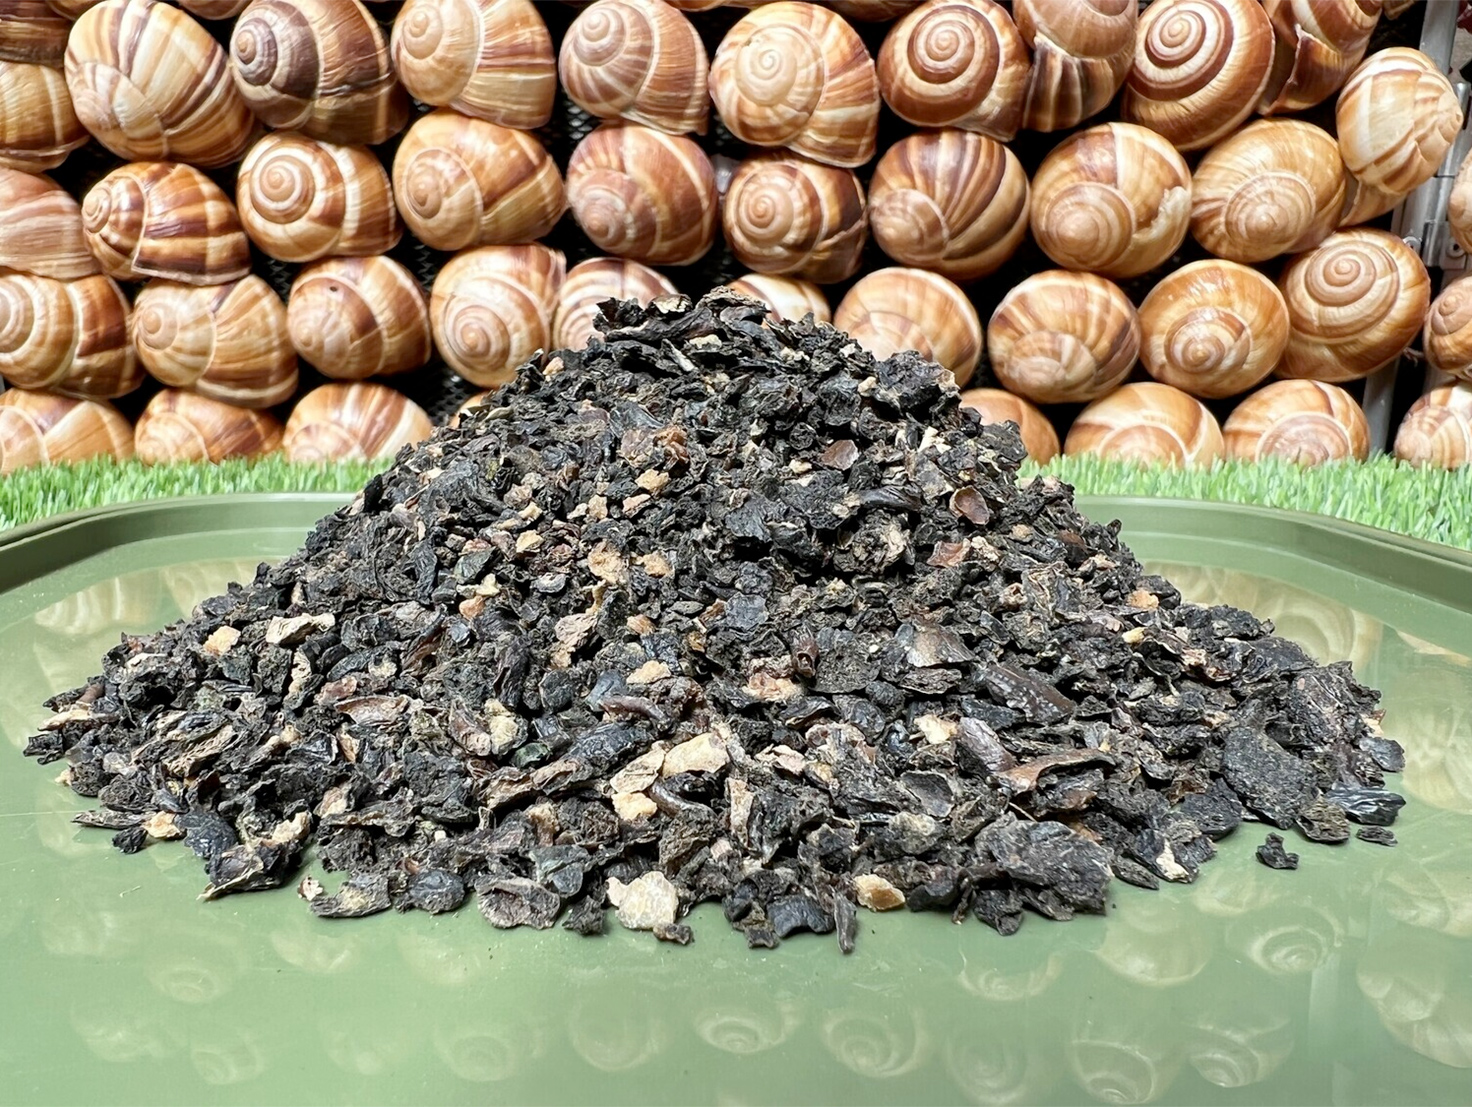 Picture of crushed snail